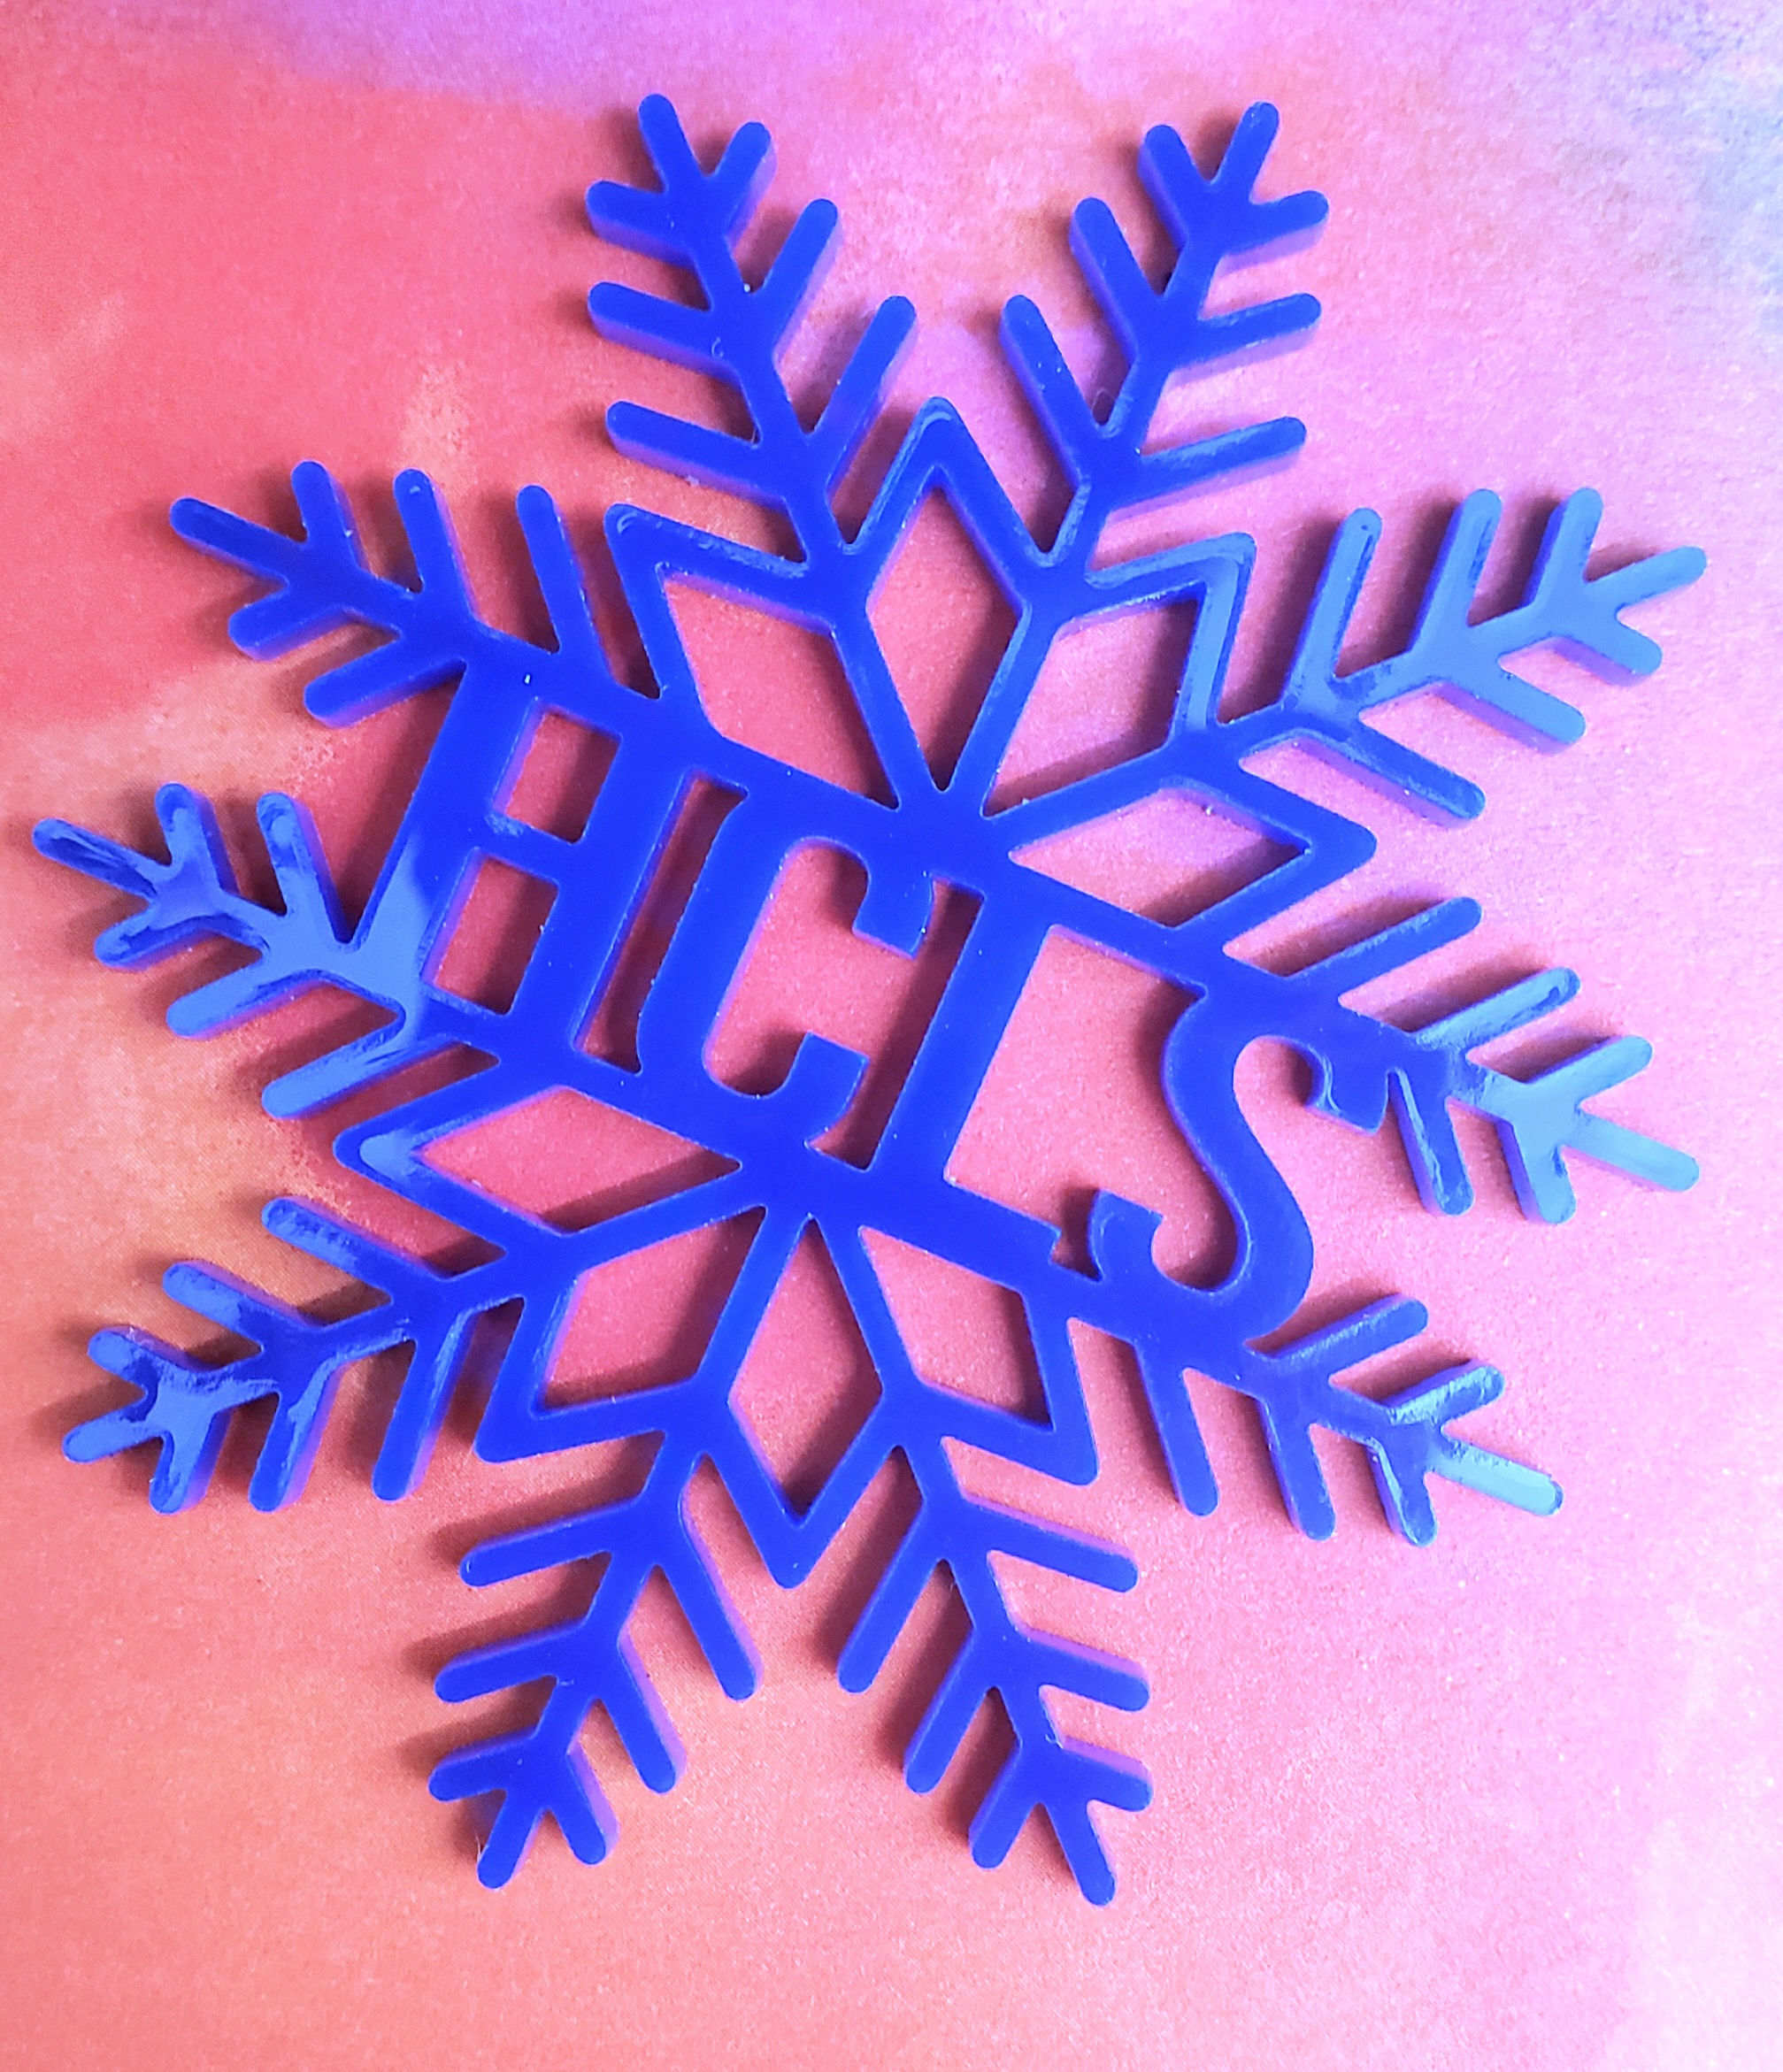 Blue Acrylic Snowflake with HCLS words cut out shown on pink  background